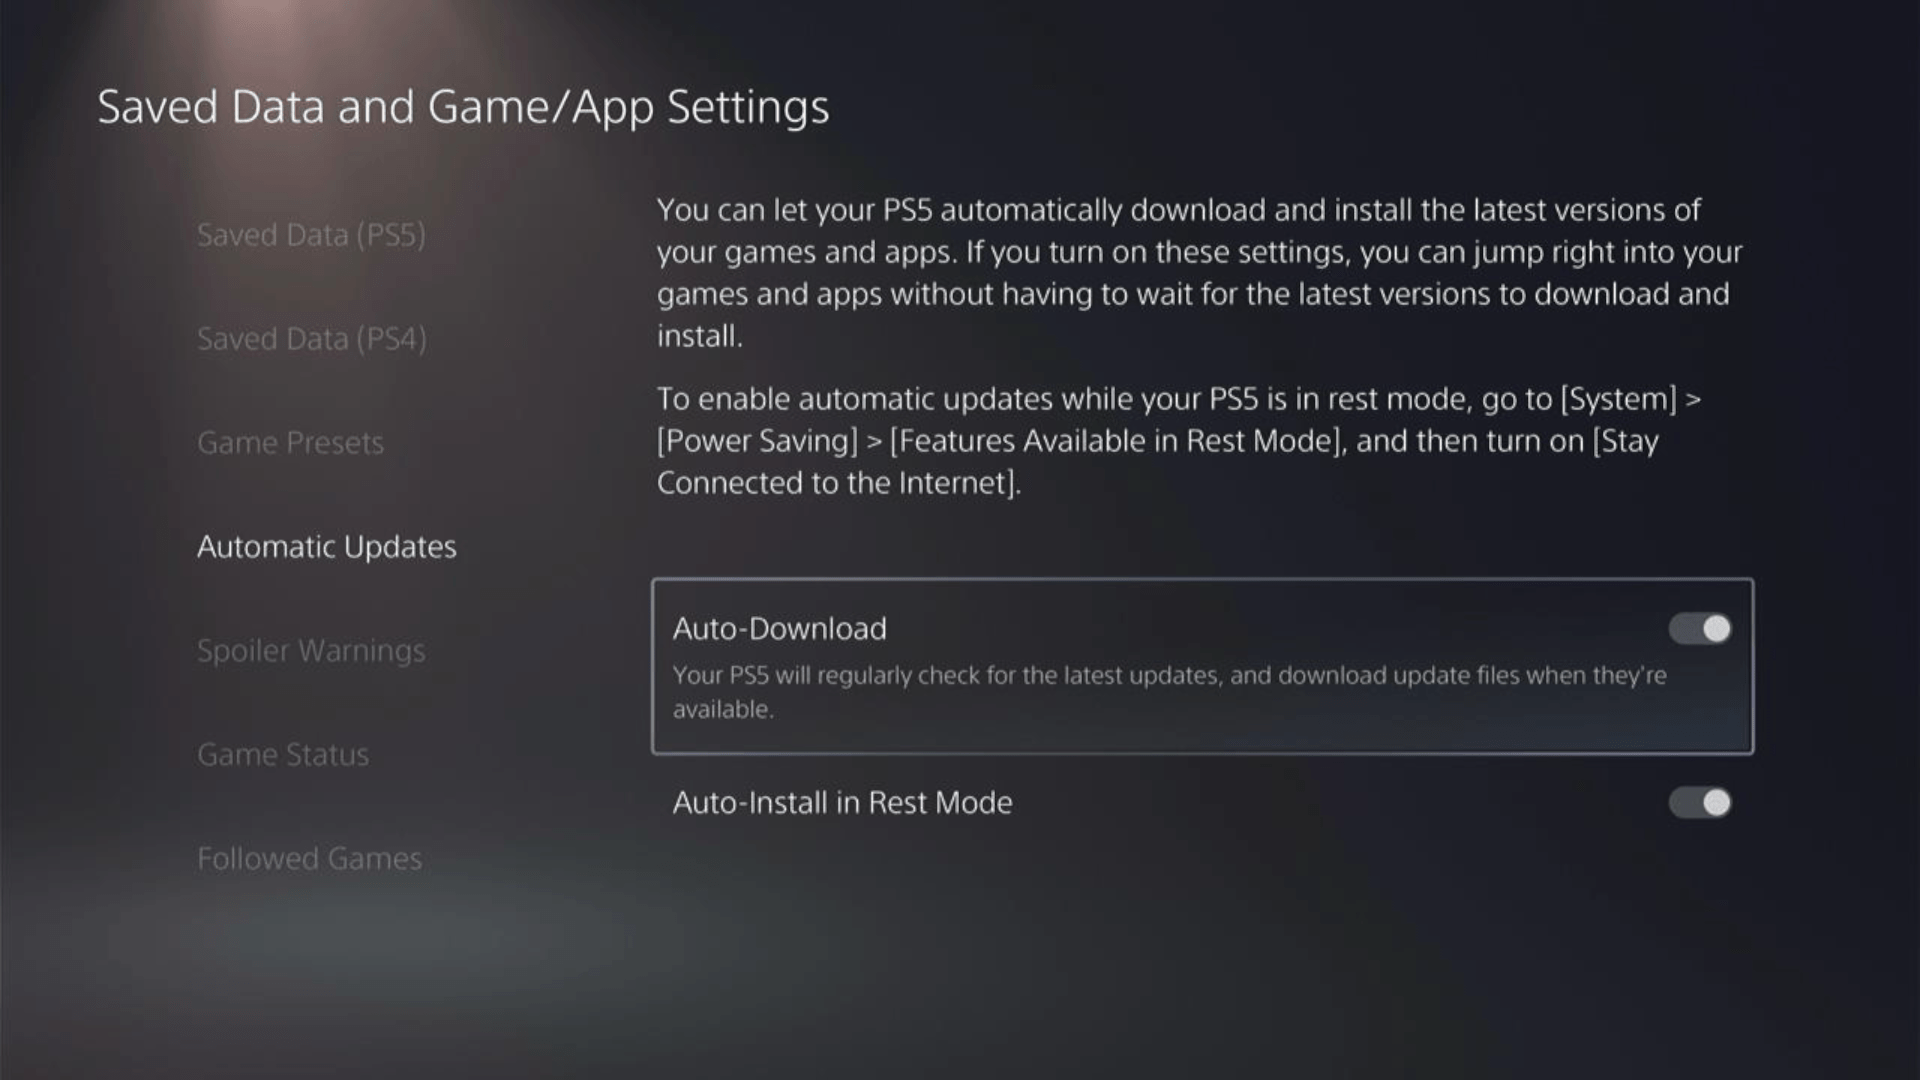 In the Saved Data and Game/App Settings window, select Automatic Updates from the left sidebar to enable automatic game updates to avoid not opening